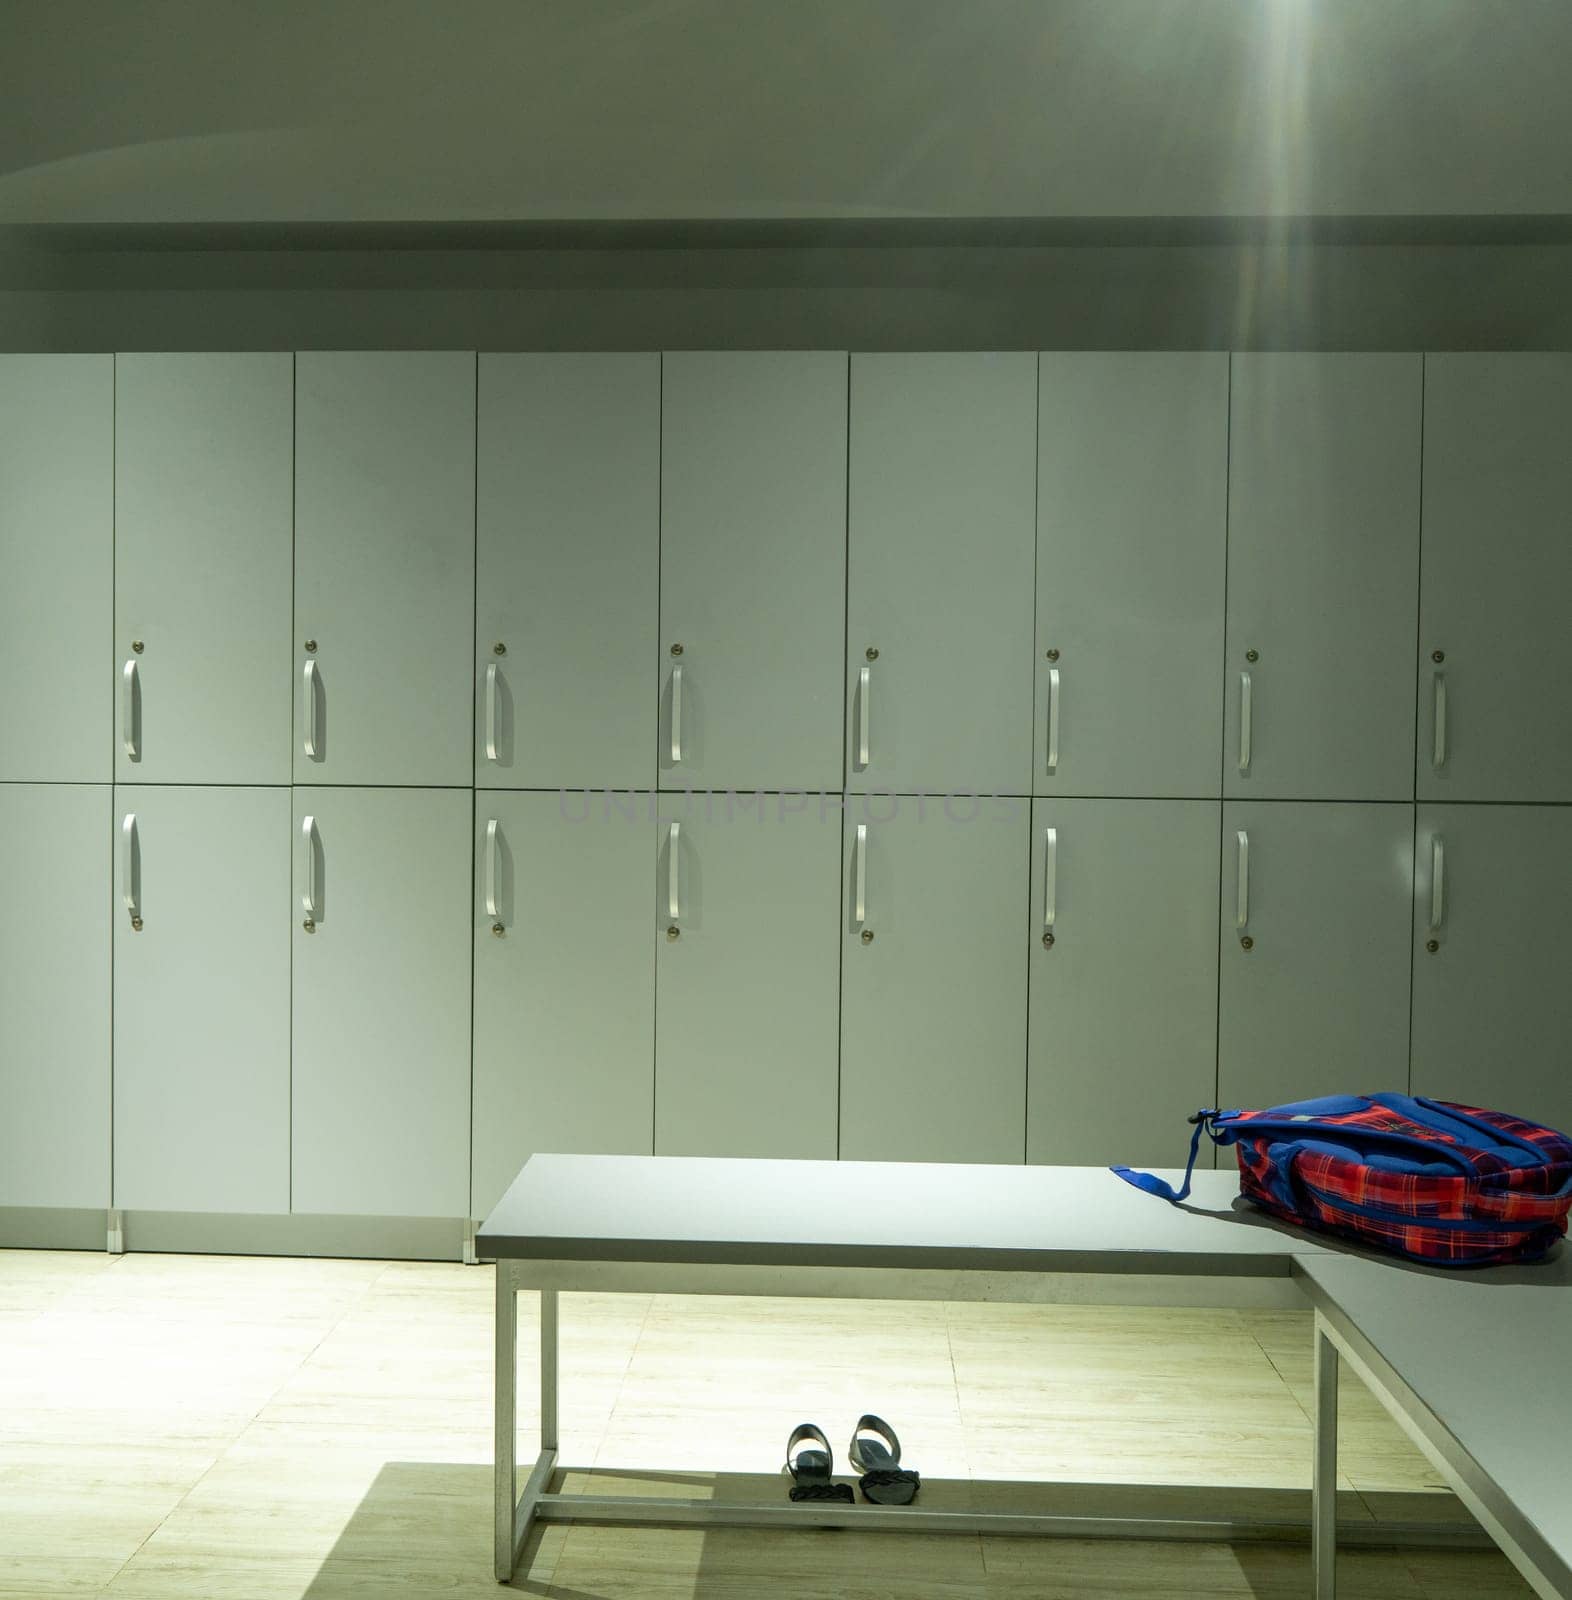 The locker room in the sports complex